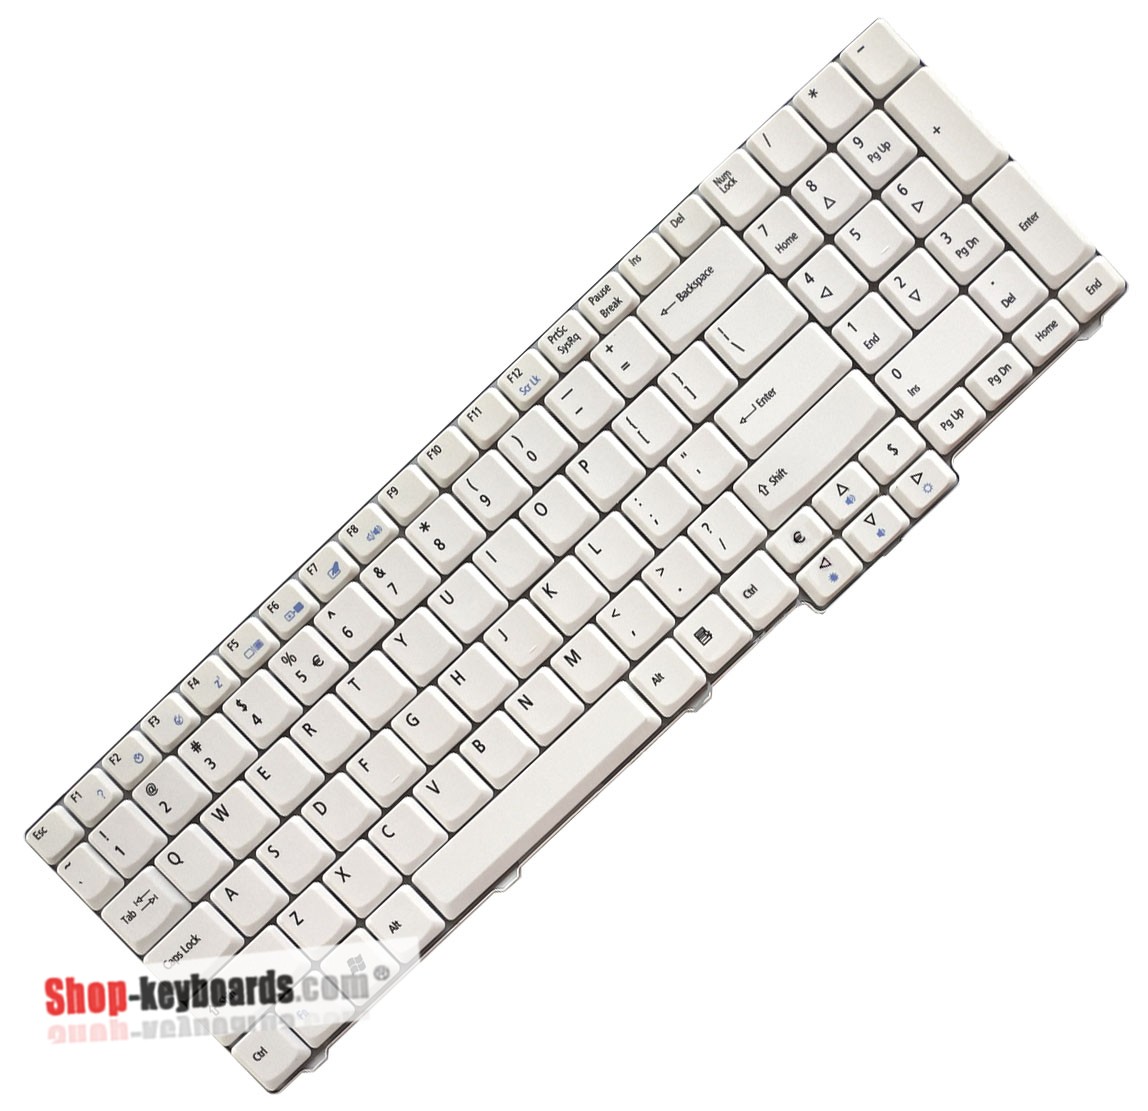 Acer Aspire 7720G-603G50BN Keyboard replacement